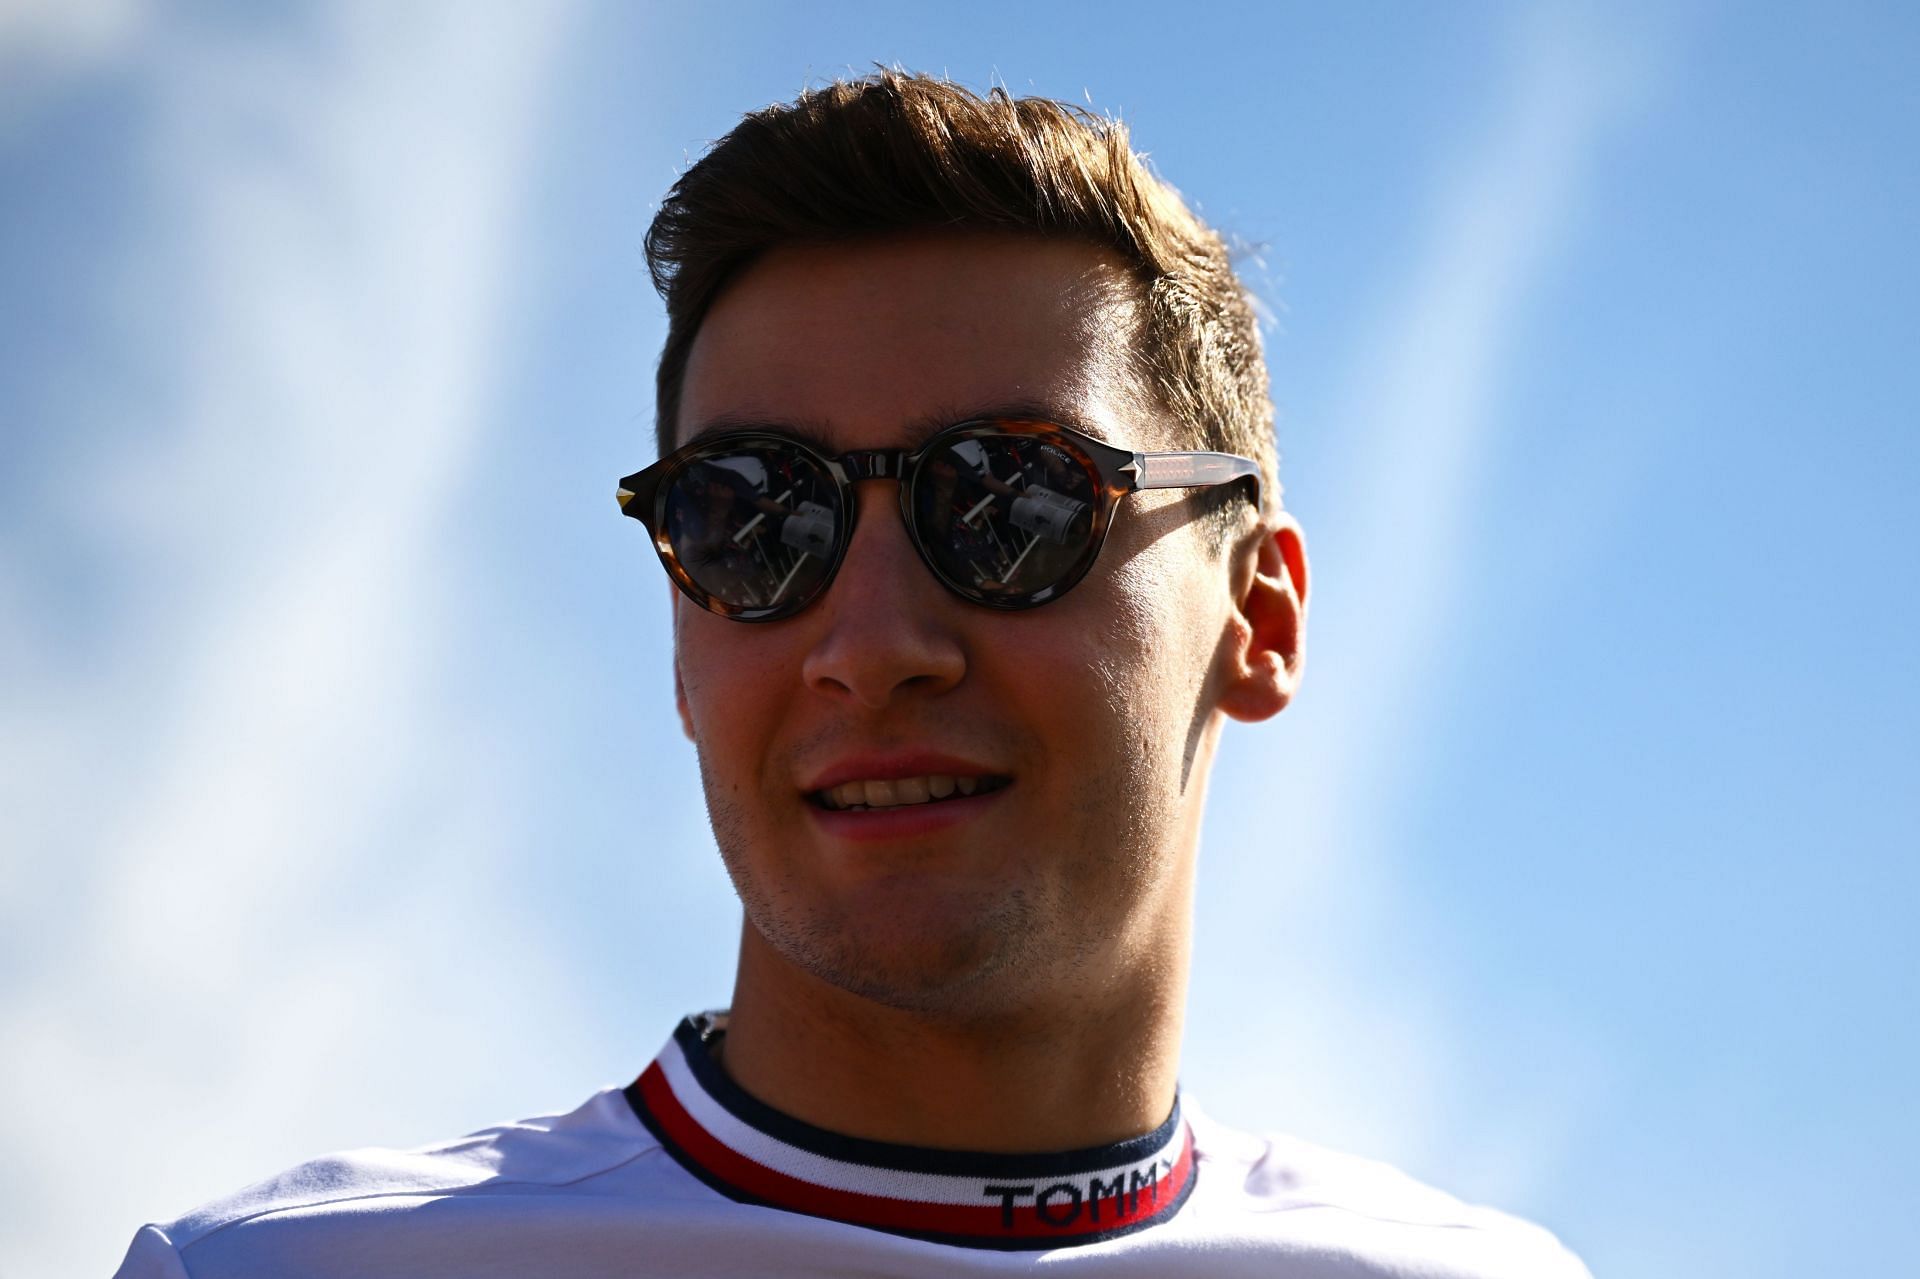 George Russell looks on as he arrives to the Paddock during the F1 Grand Prix of Great Britain at Silverstone on July 03, 2022 in Northampton, England. (Photo by Clive Mason/Getty Images)